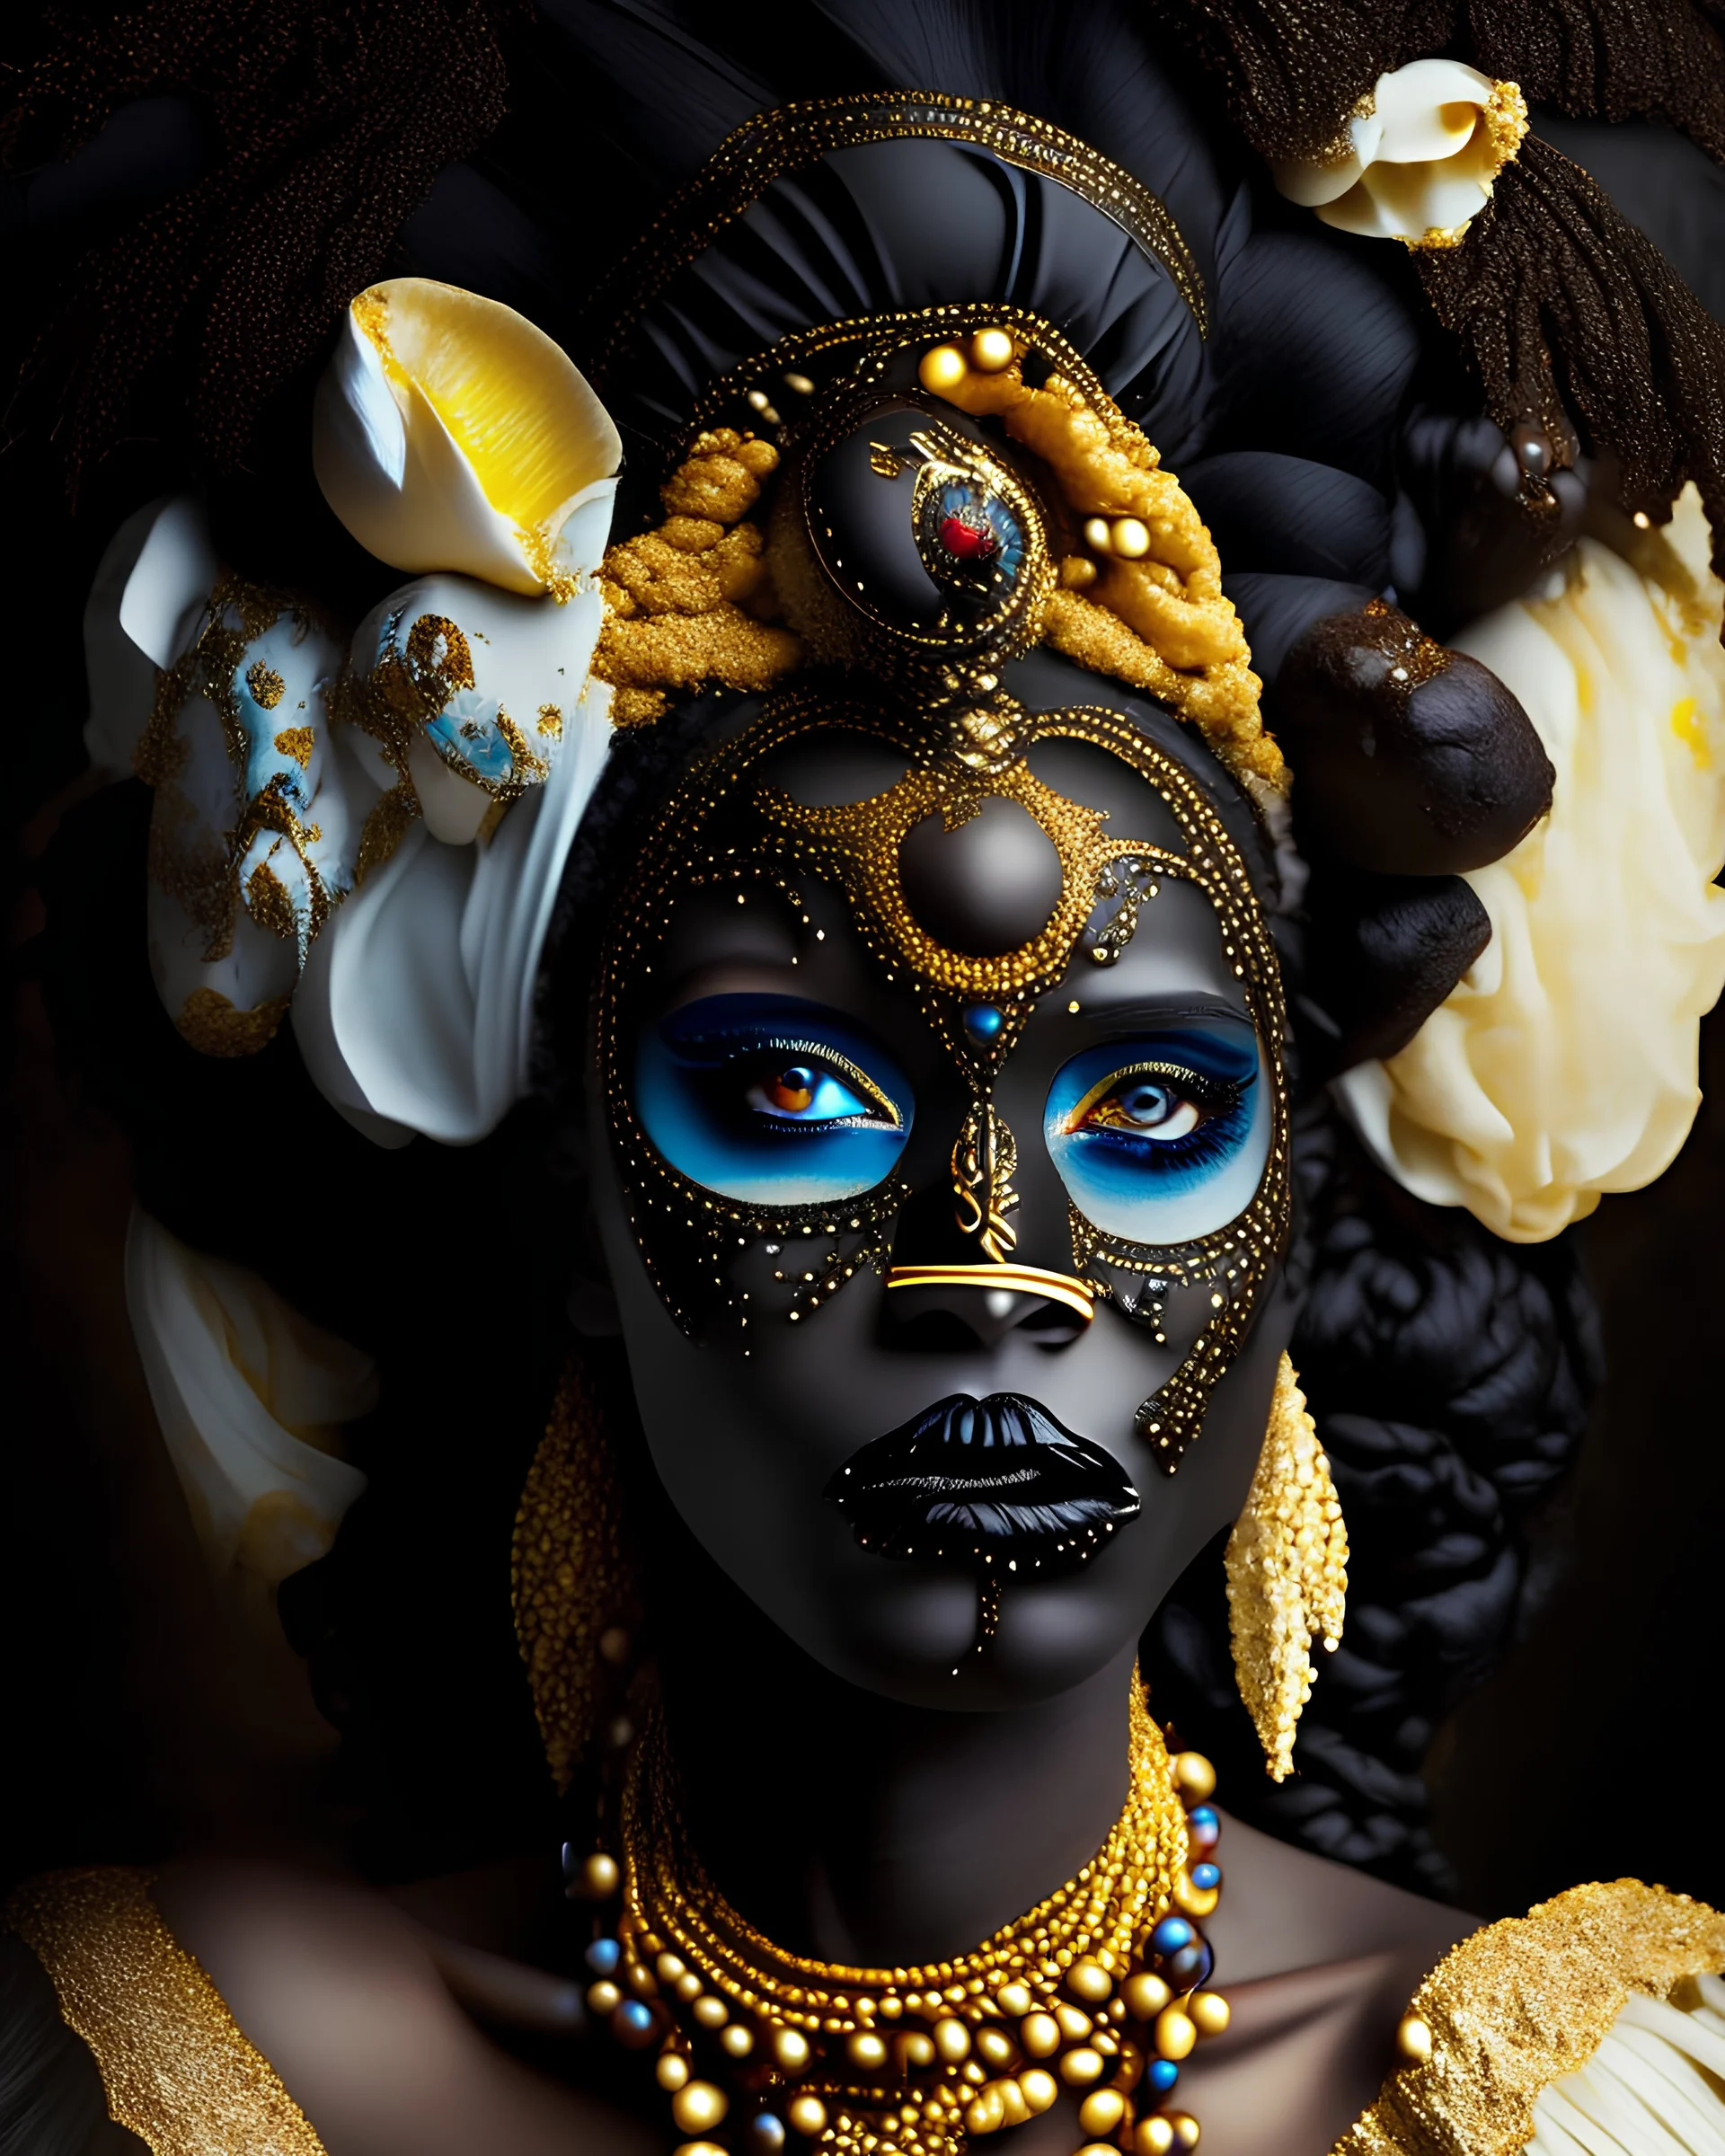 Beautiful vantablack carnival rococo style vantawhite woman portrait adorned with apicy vanilla crus, nutmeg beans driws caffwe beanss food and vinamon spyce with vanilla and Fried fruit food headdress wearing voidcore etherial shamanism rococ style venetian carnival like mineral stone ribbed wooden filigree cinamon colour face masque wearing Golden ad copper Dusty make up on glitter covered make up on, wearing floral embossed rococo voidcore shamanism style costume armour dress Extremely d